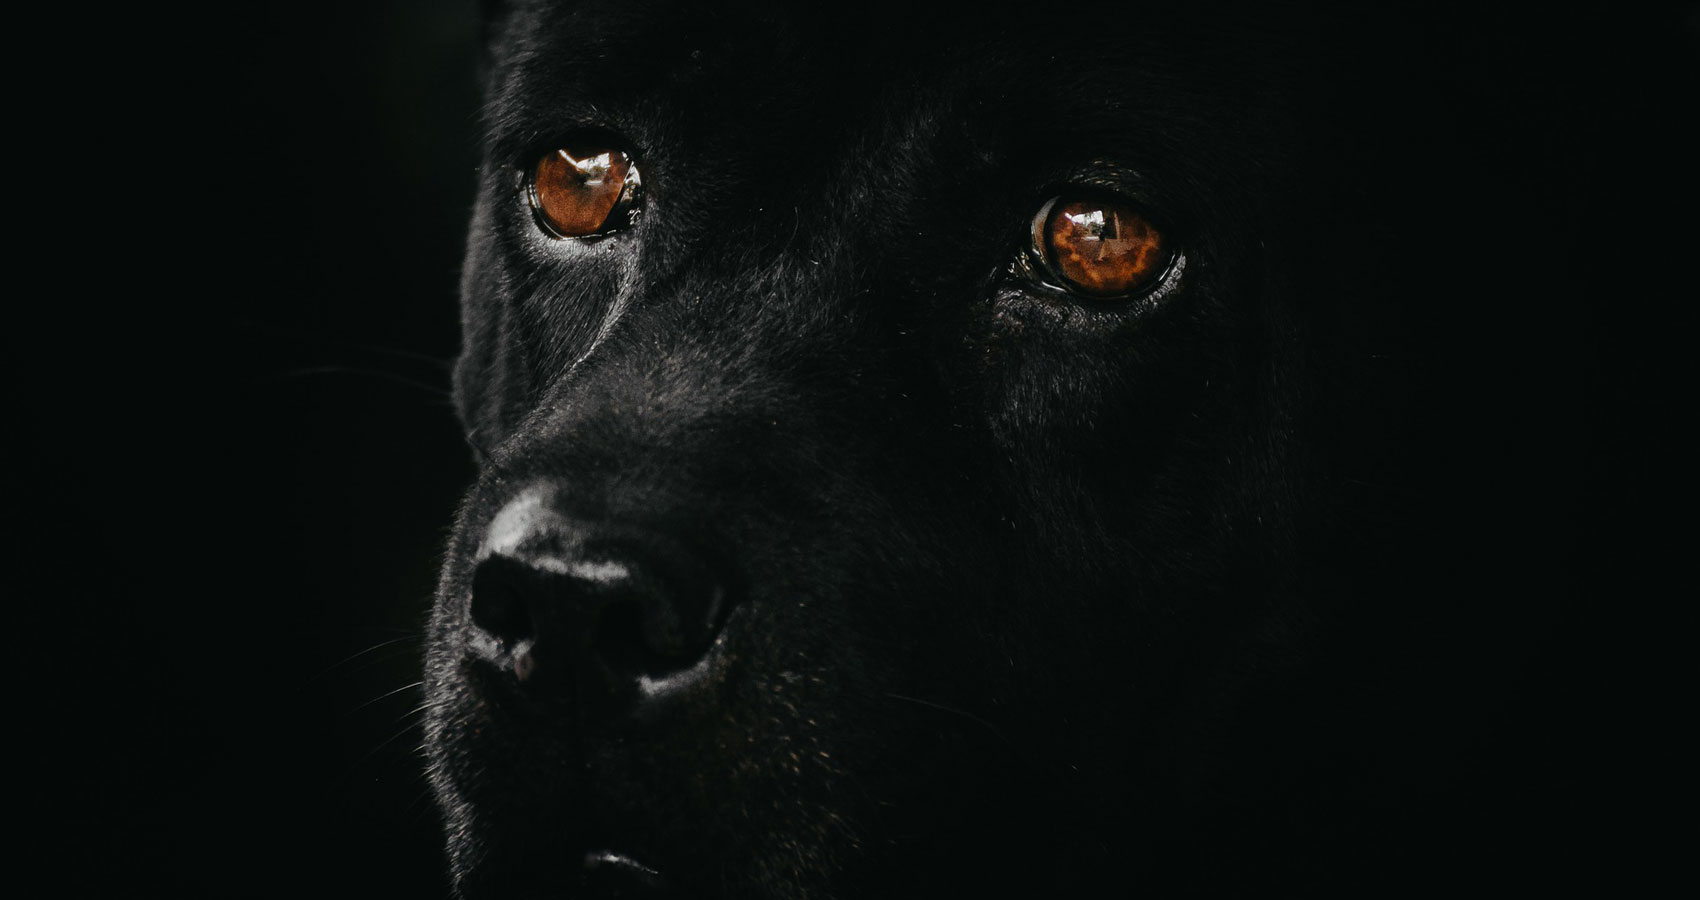 The Bark of The Black Dog, poetry by Patrick Doran at Spillwords.com